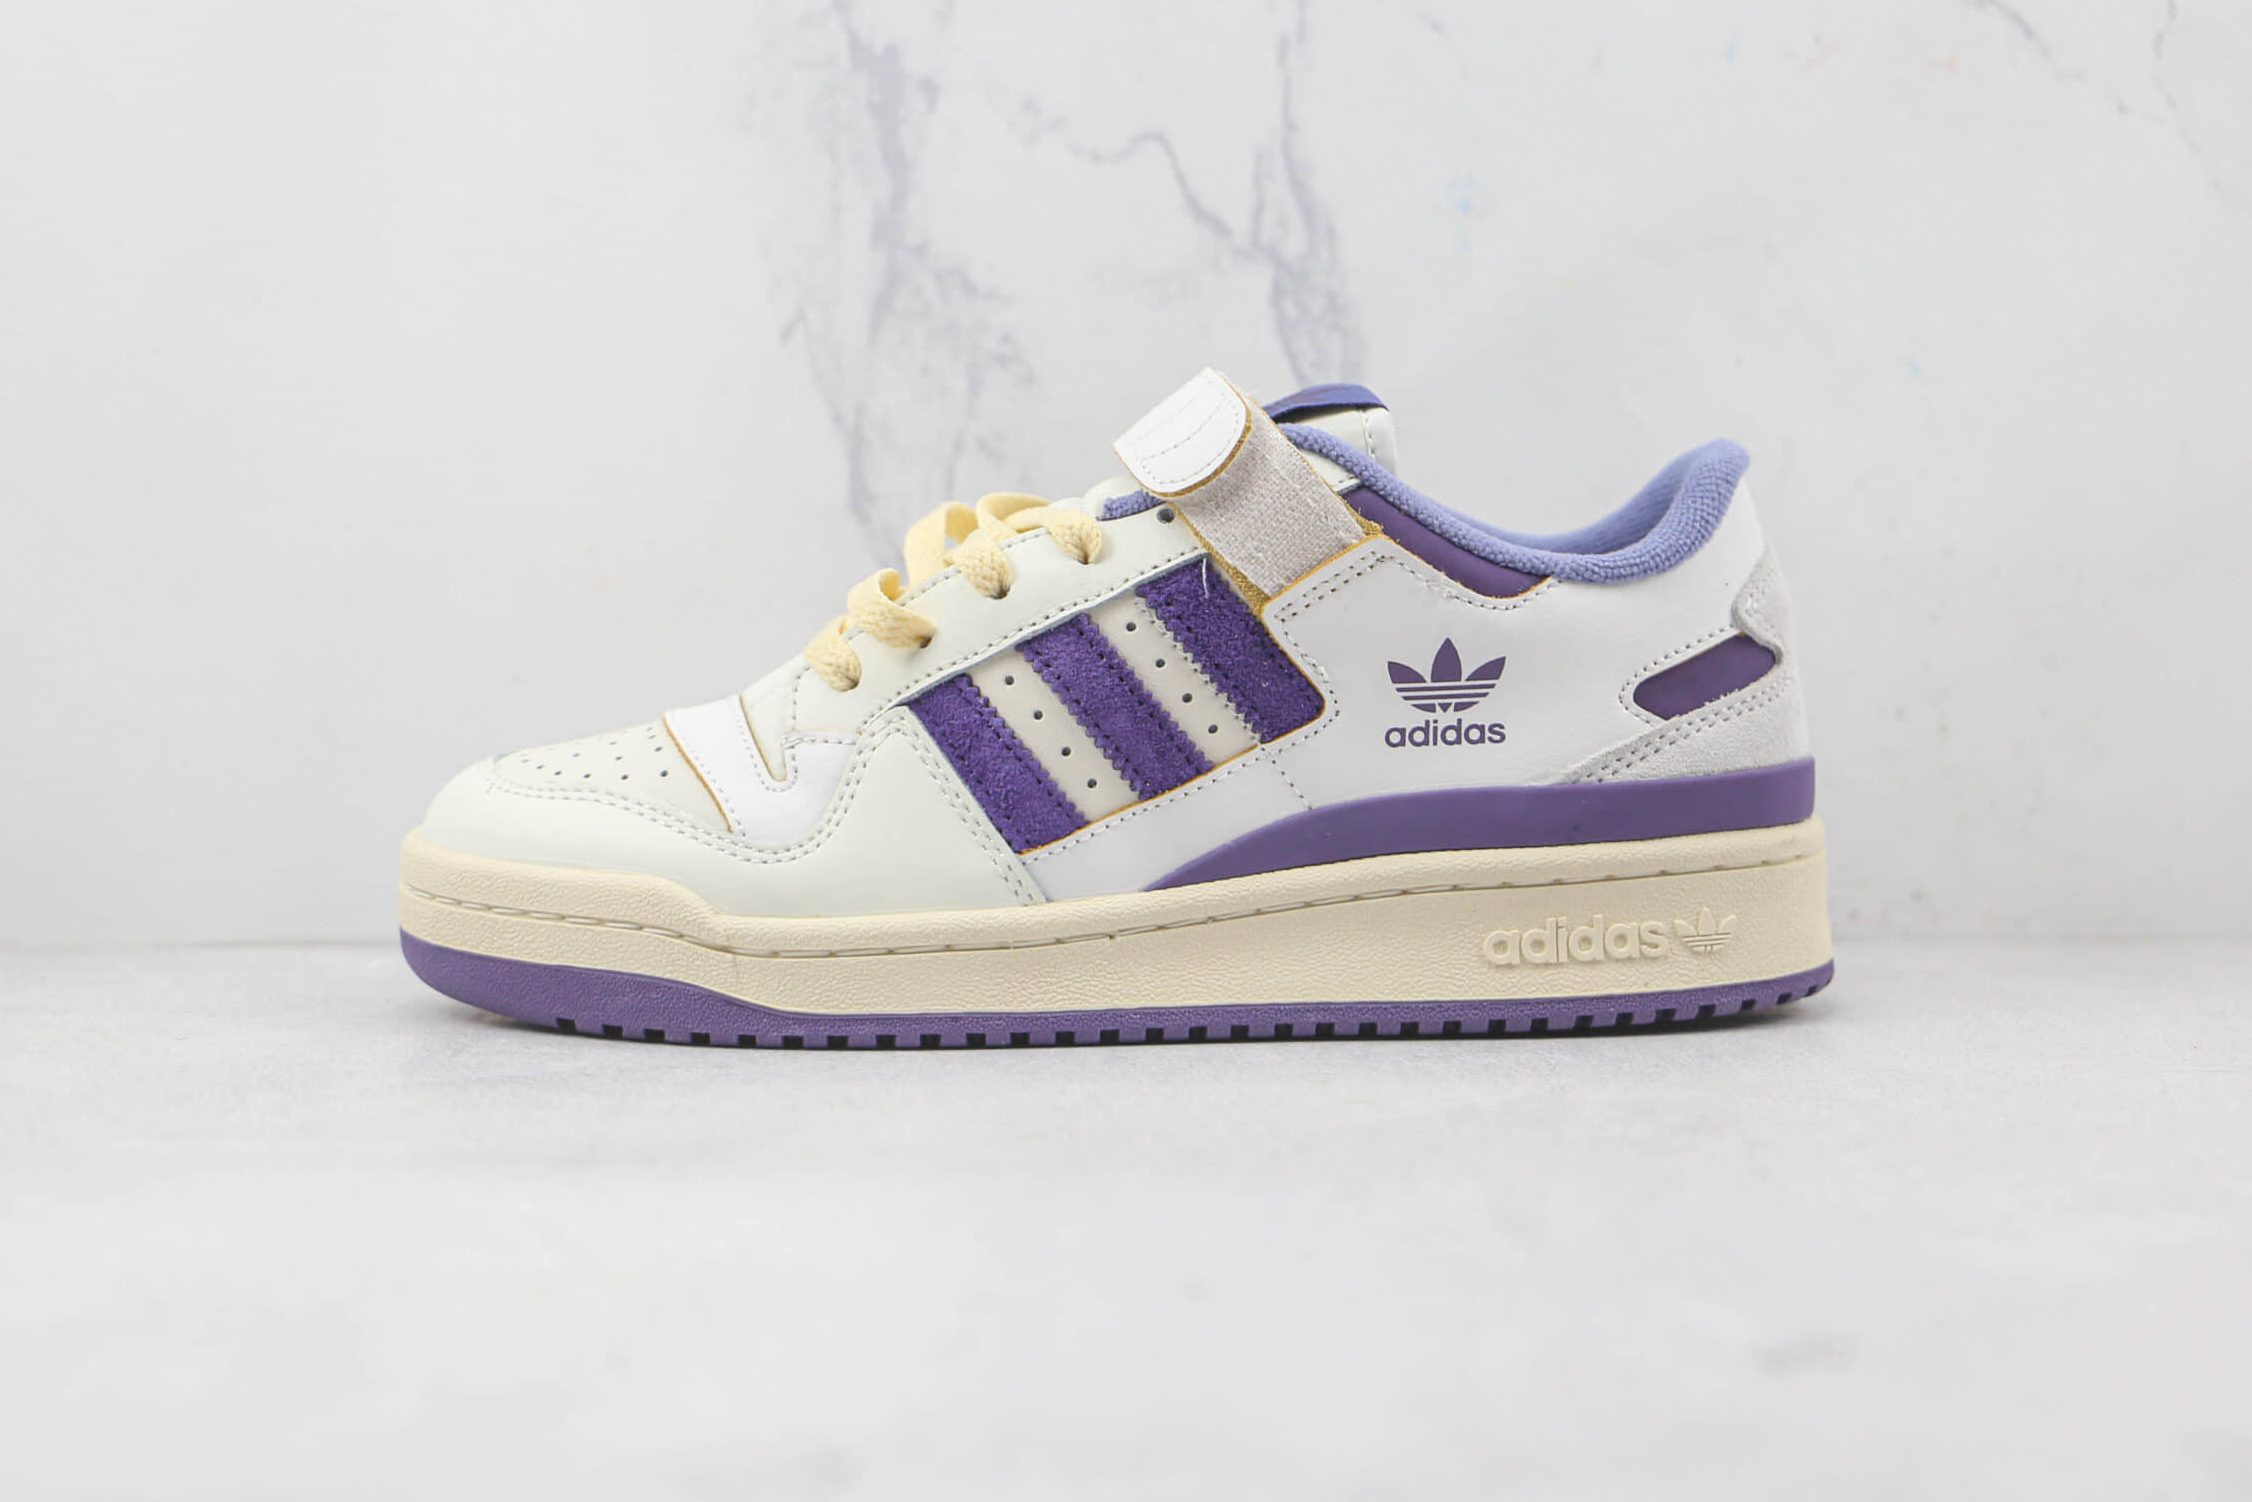 Adidas Forum 84 Low 'White College Purple' GX4535 - Trendy and Iconic Sneakers